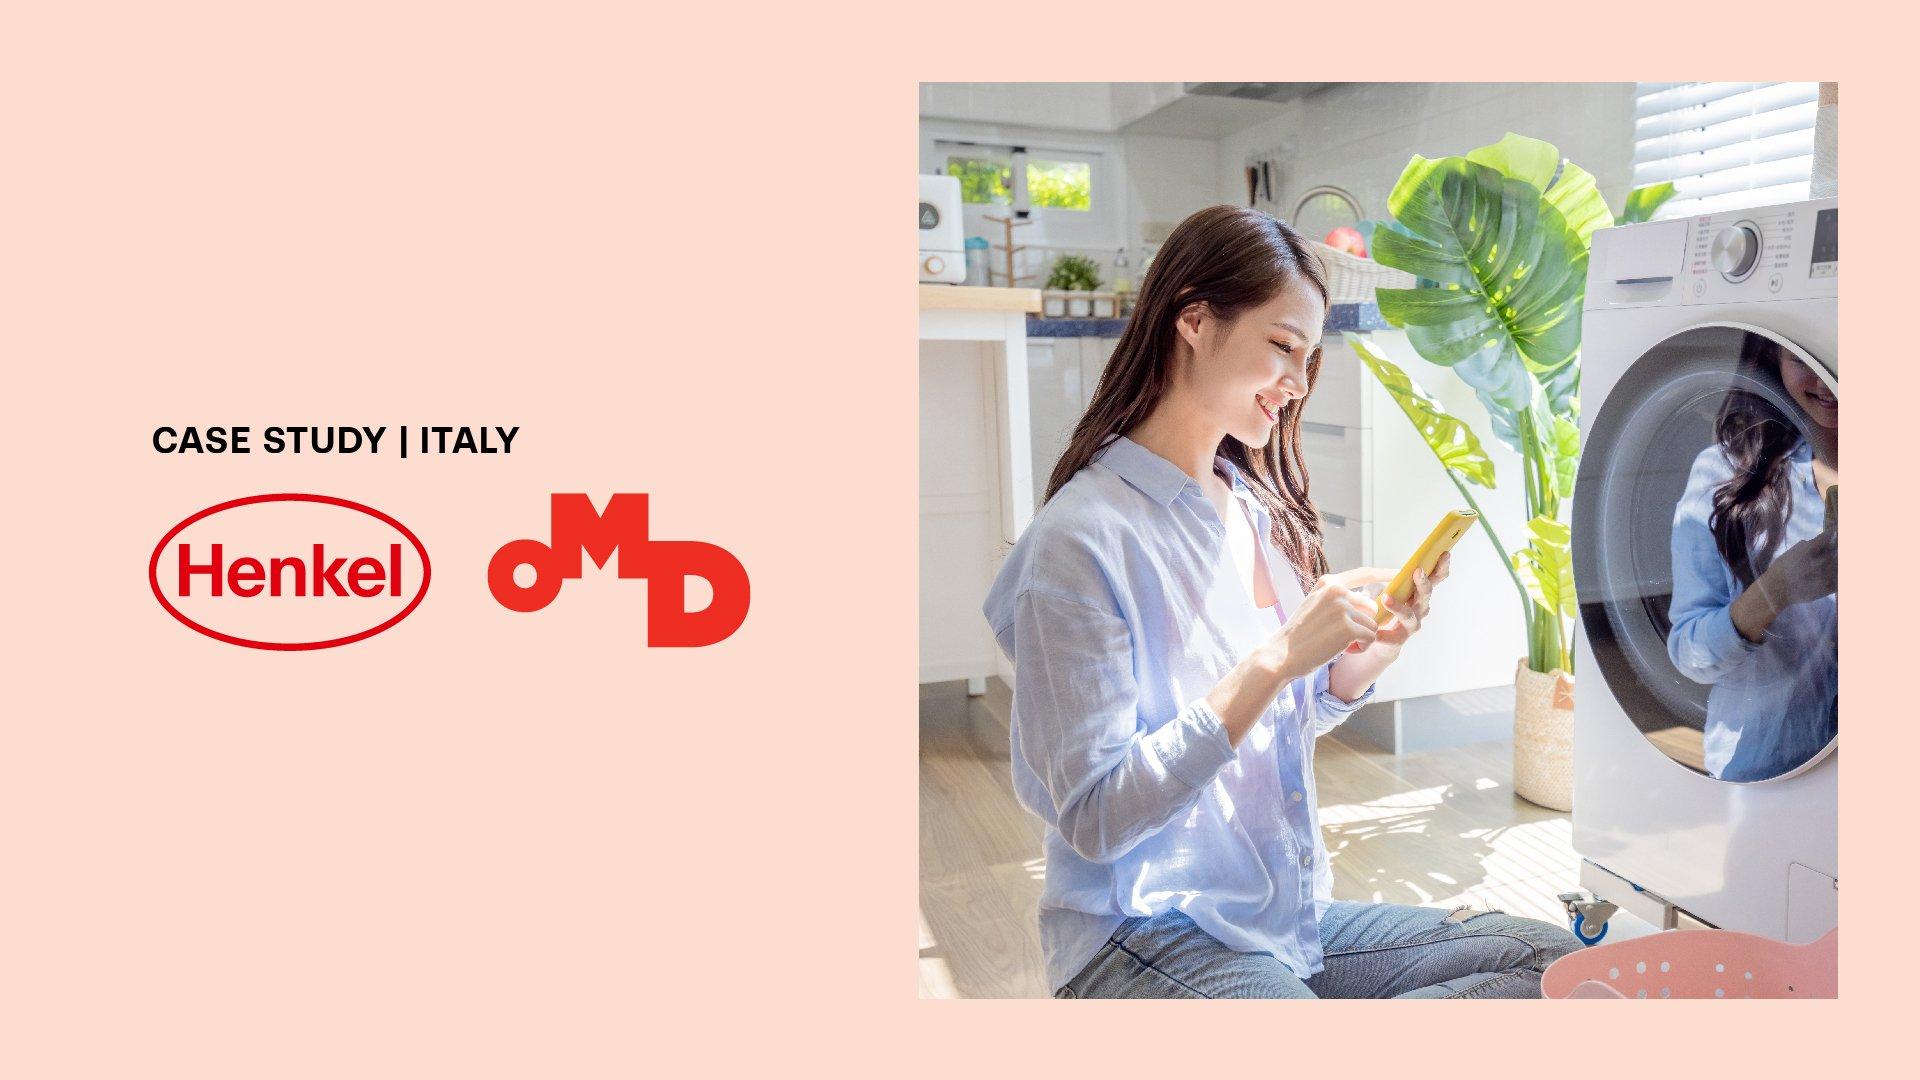 Image shows Henkel and OMD logo while a woman sits with her phone in front of a washing machine